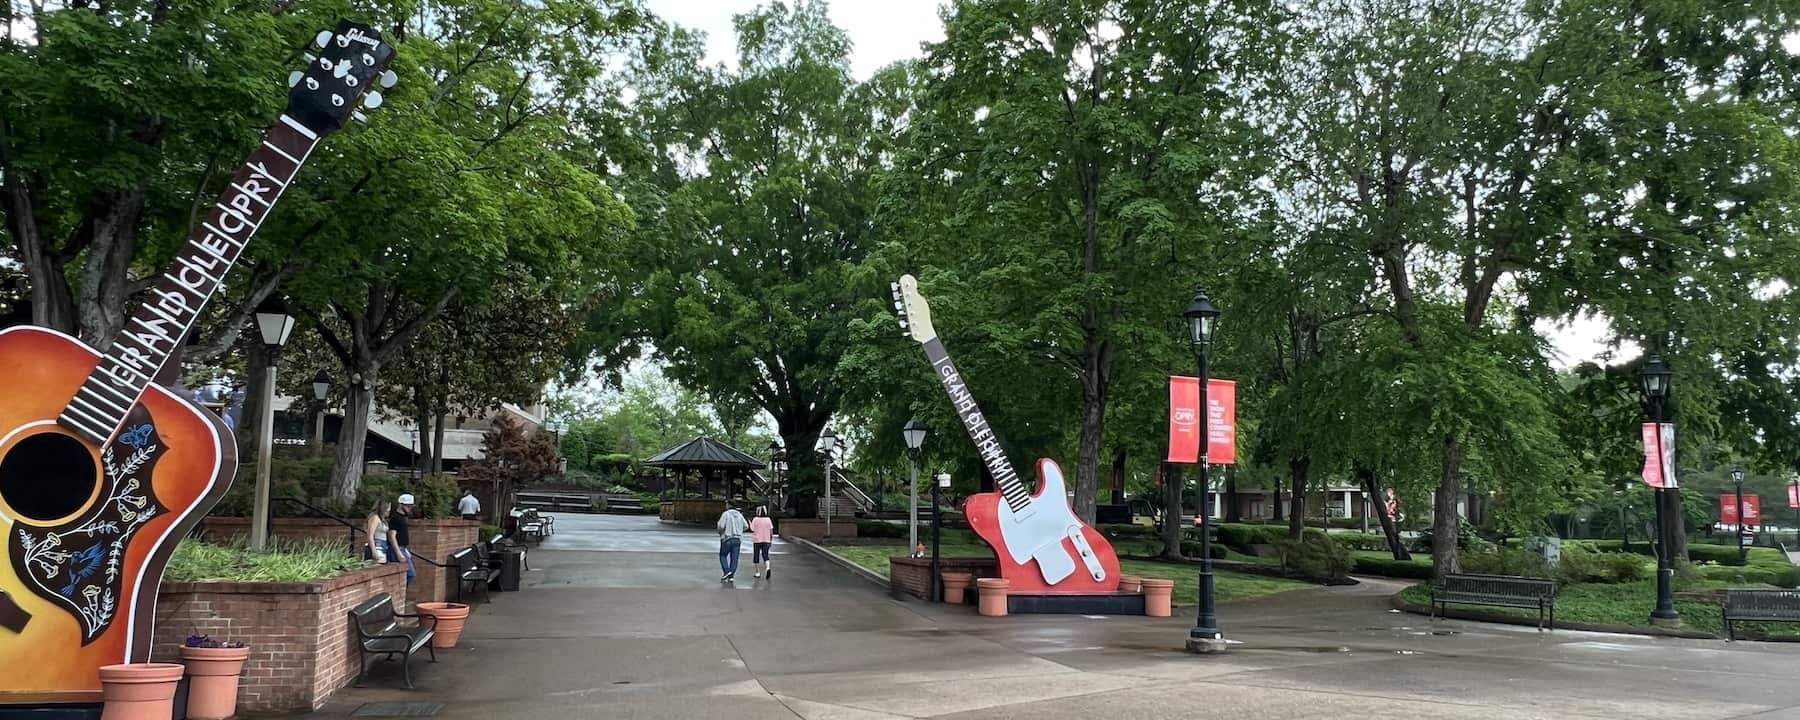 Exploring Nashville by car and the Grand Ole Opry